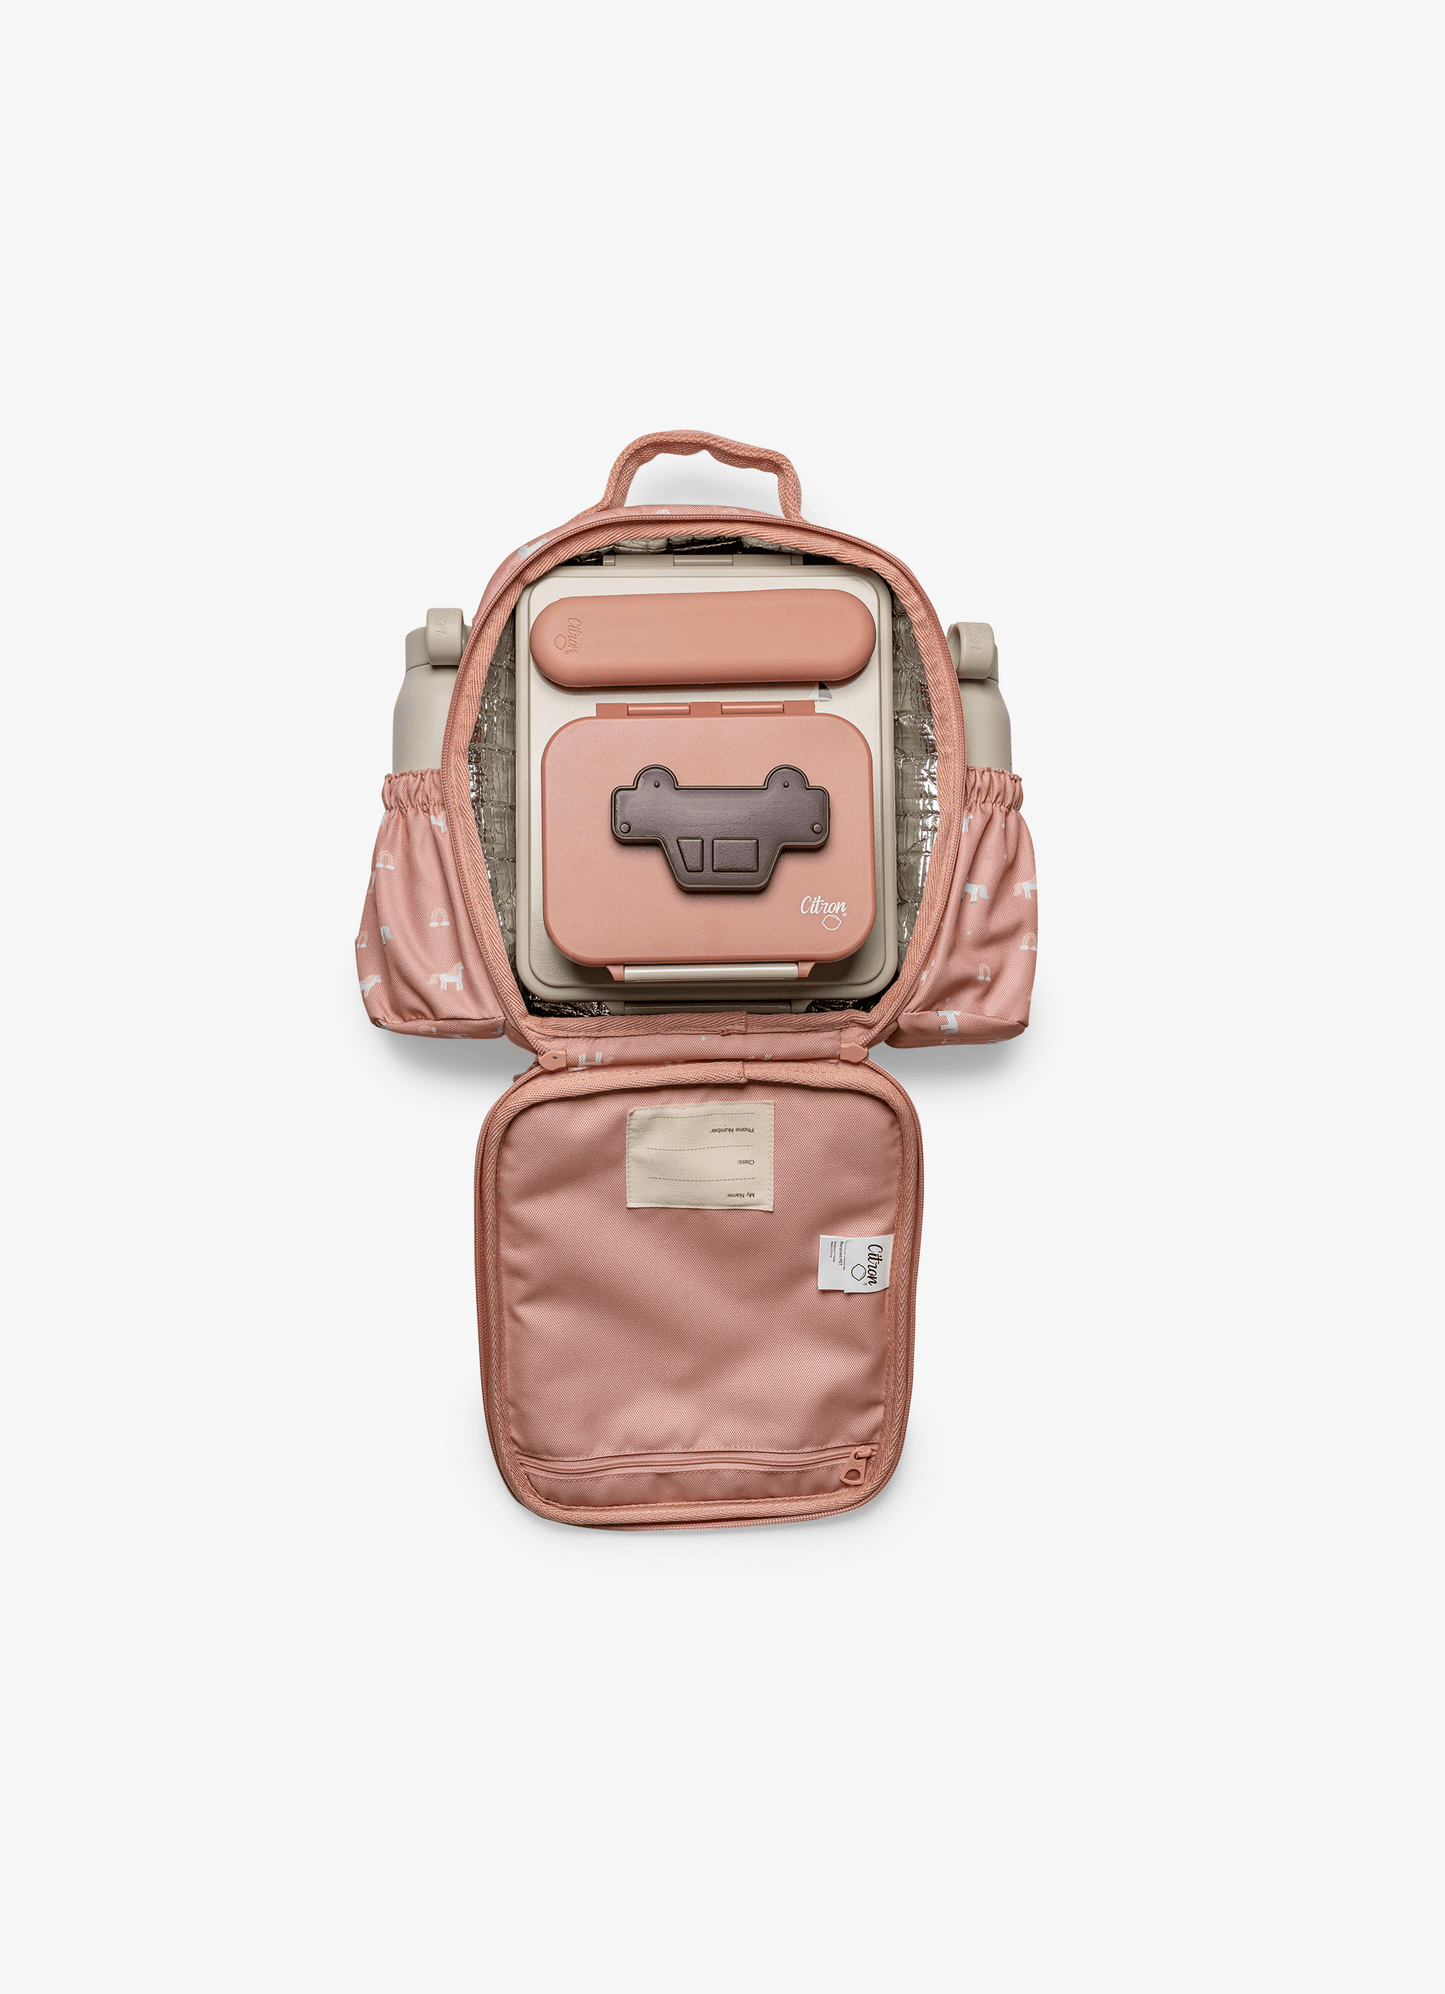 Insulated Lunch Bag Backpack - Unicorn Blush pink